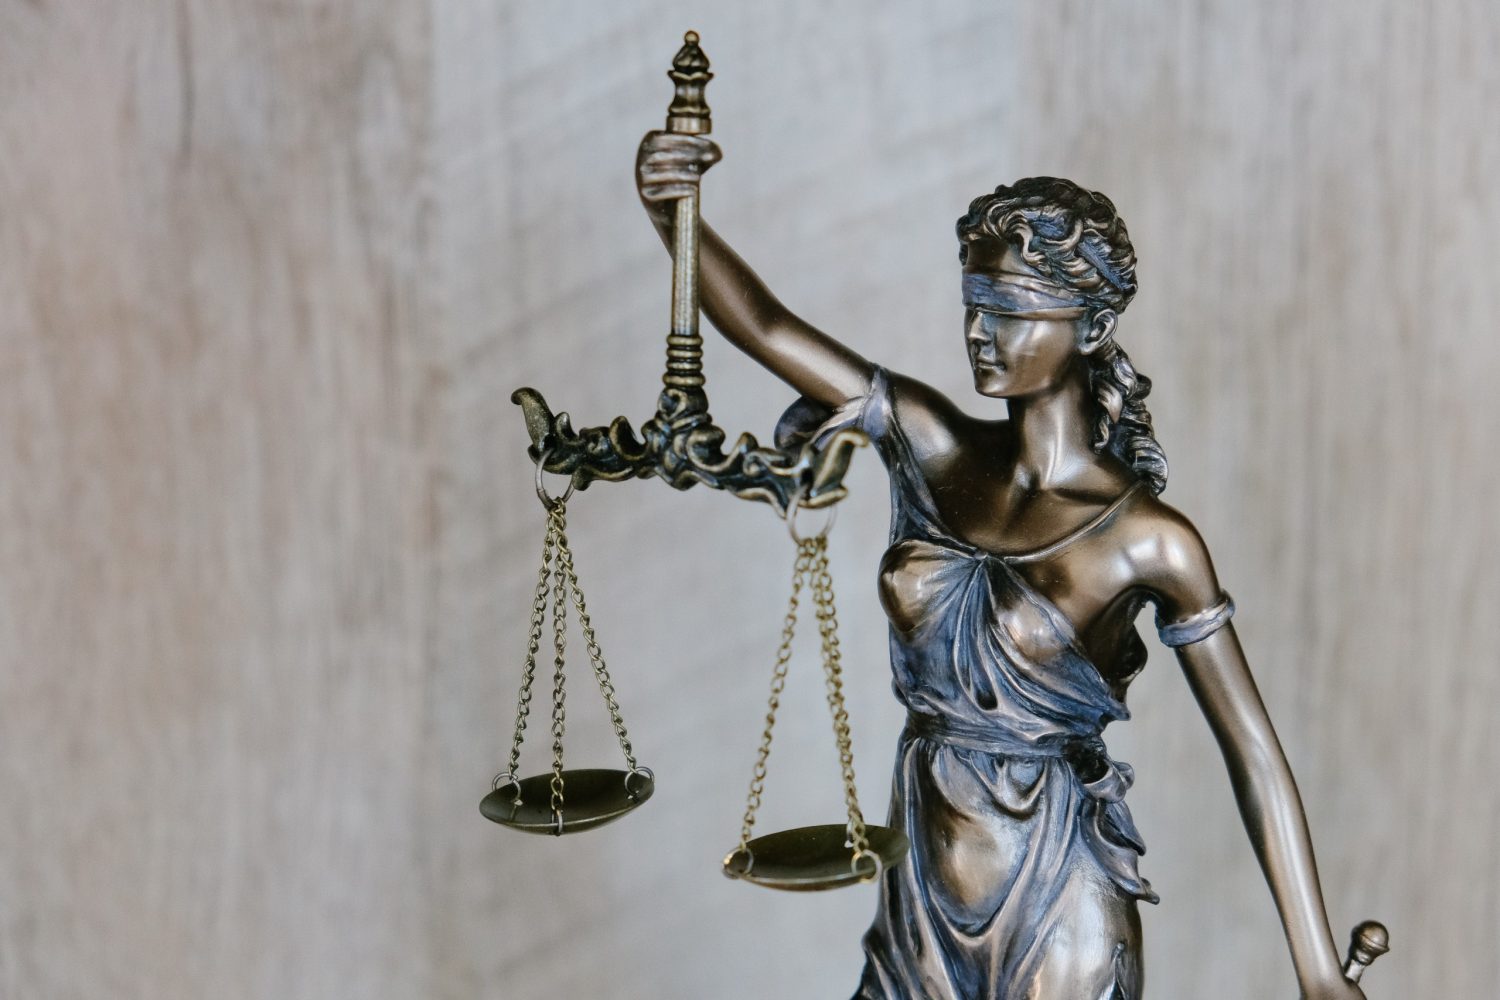 Lady Justice holding cool old-timey scales